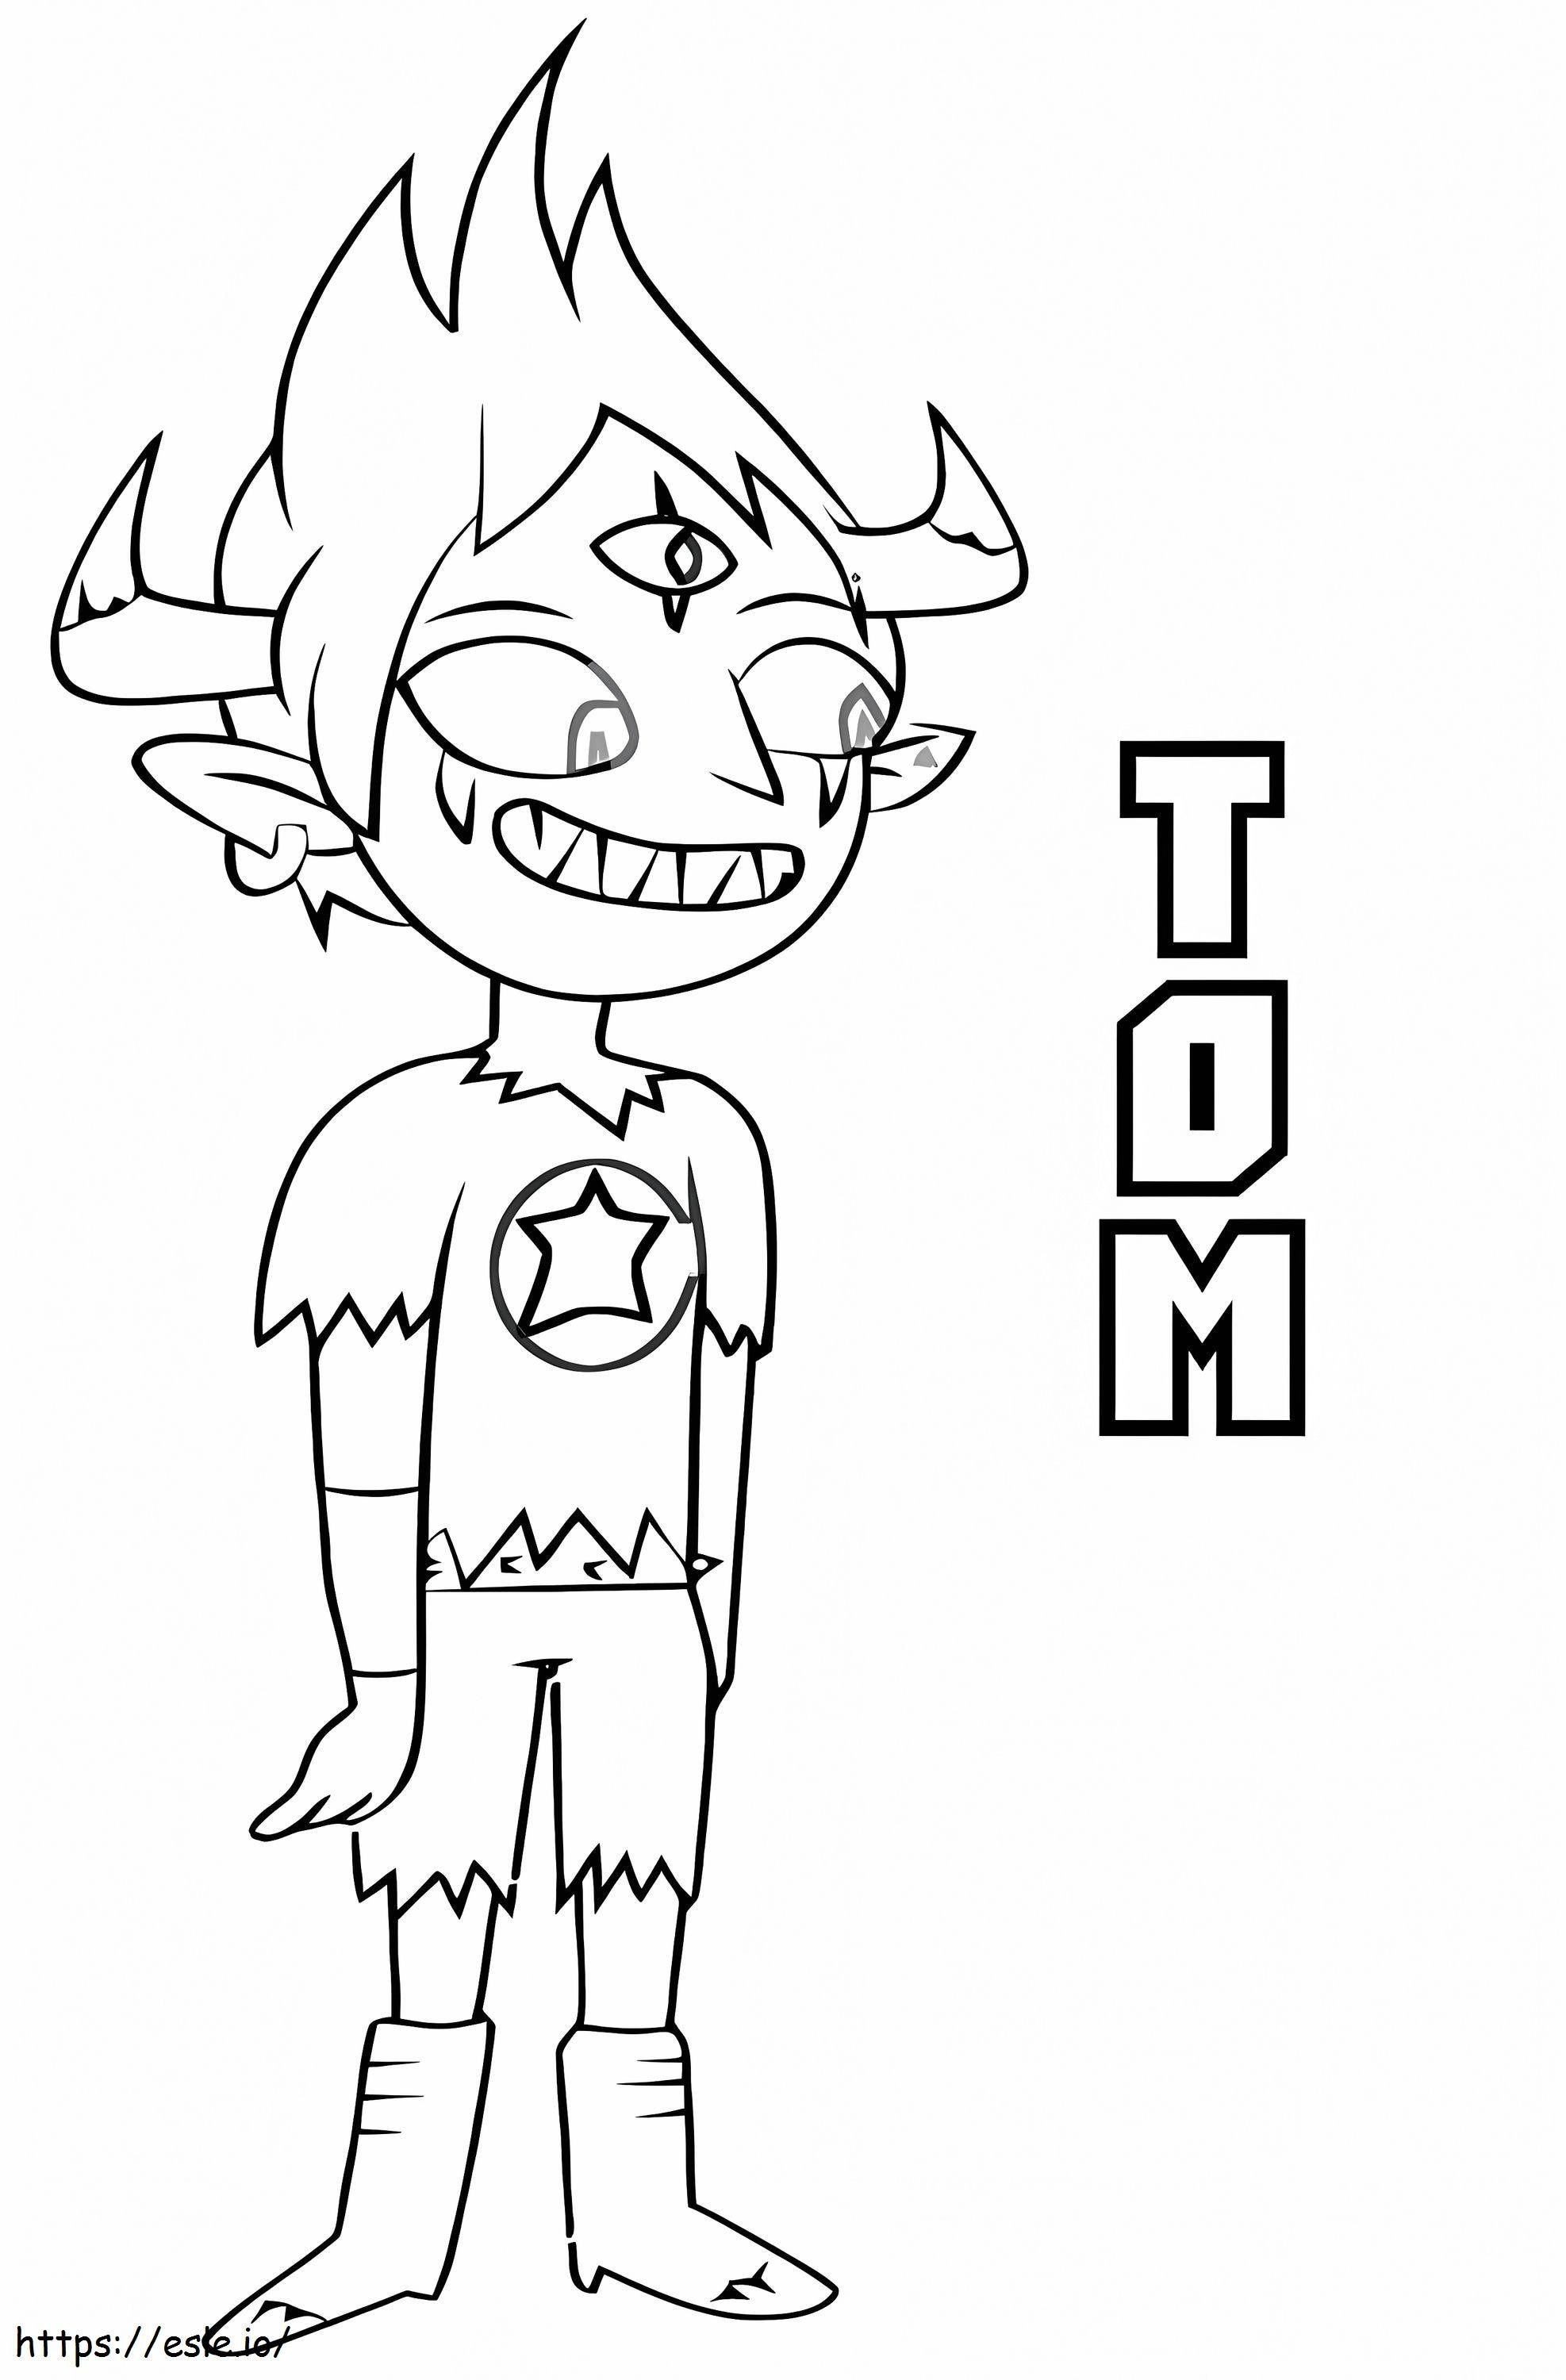 Tom Luctor Smiling coloring page